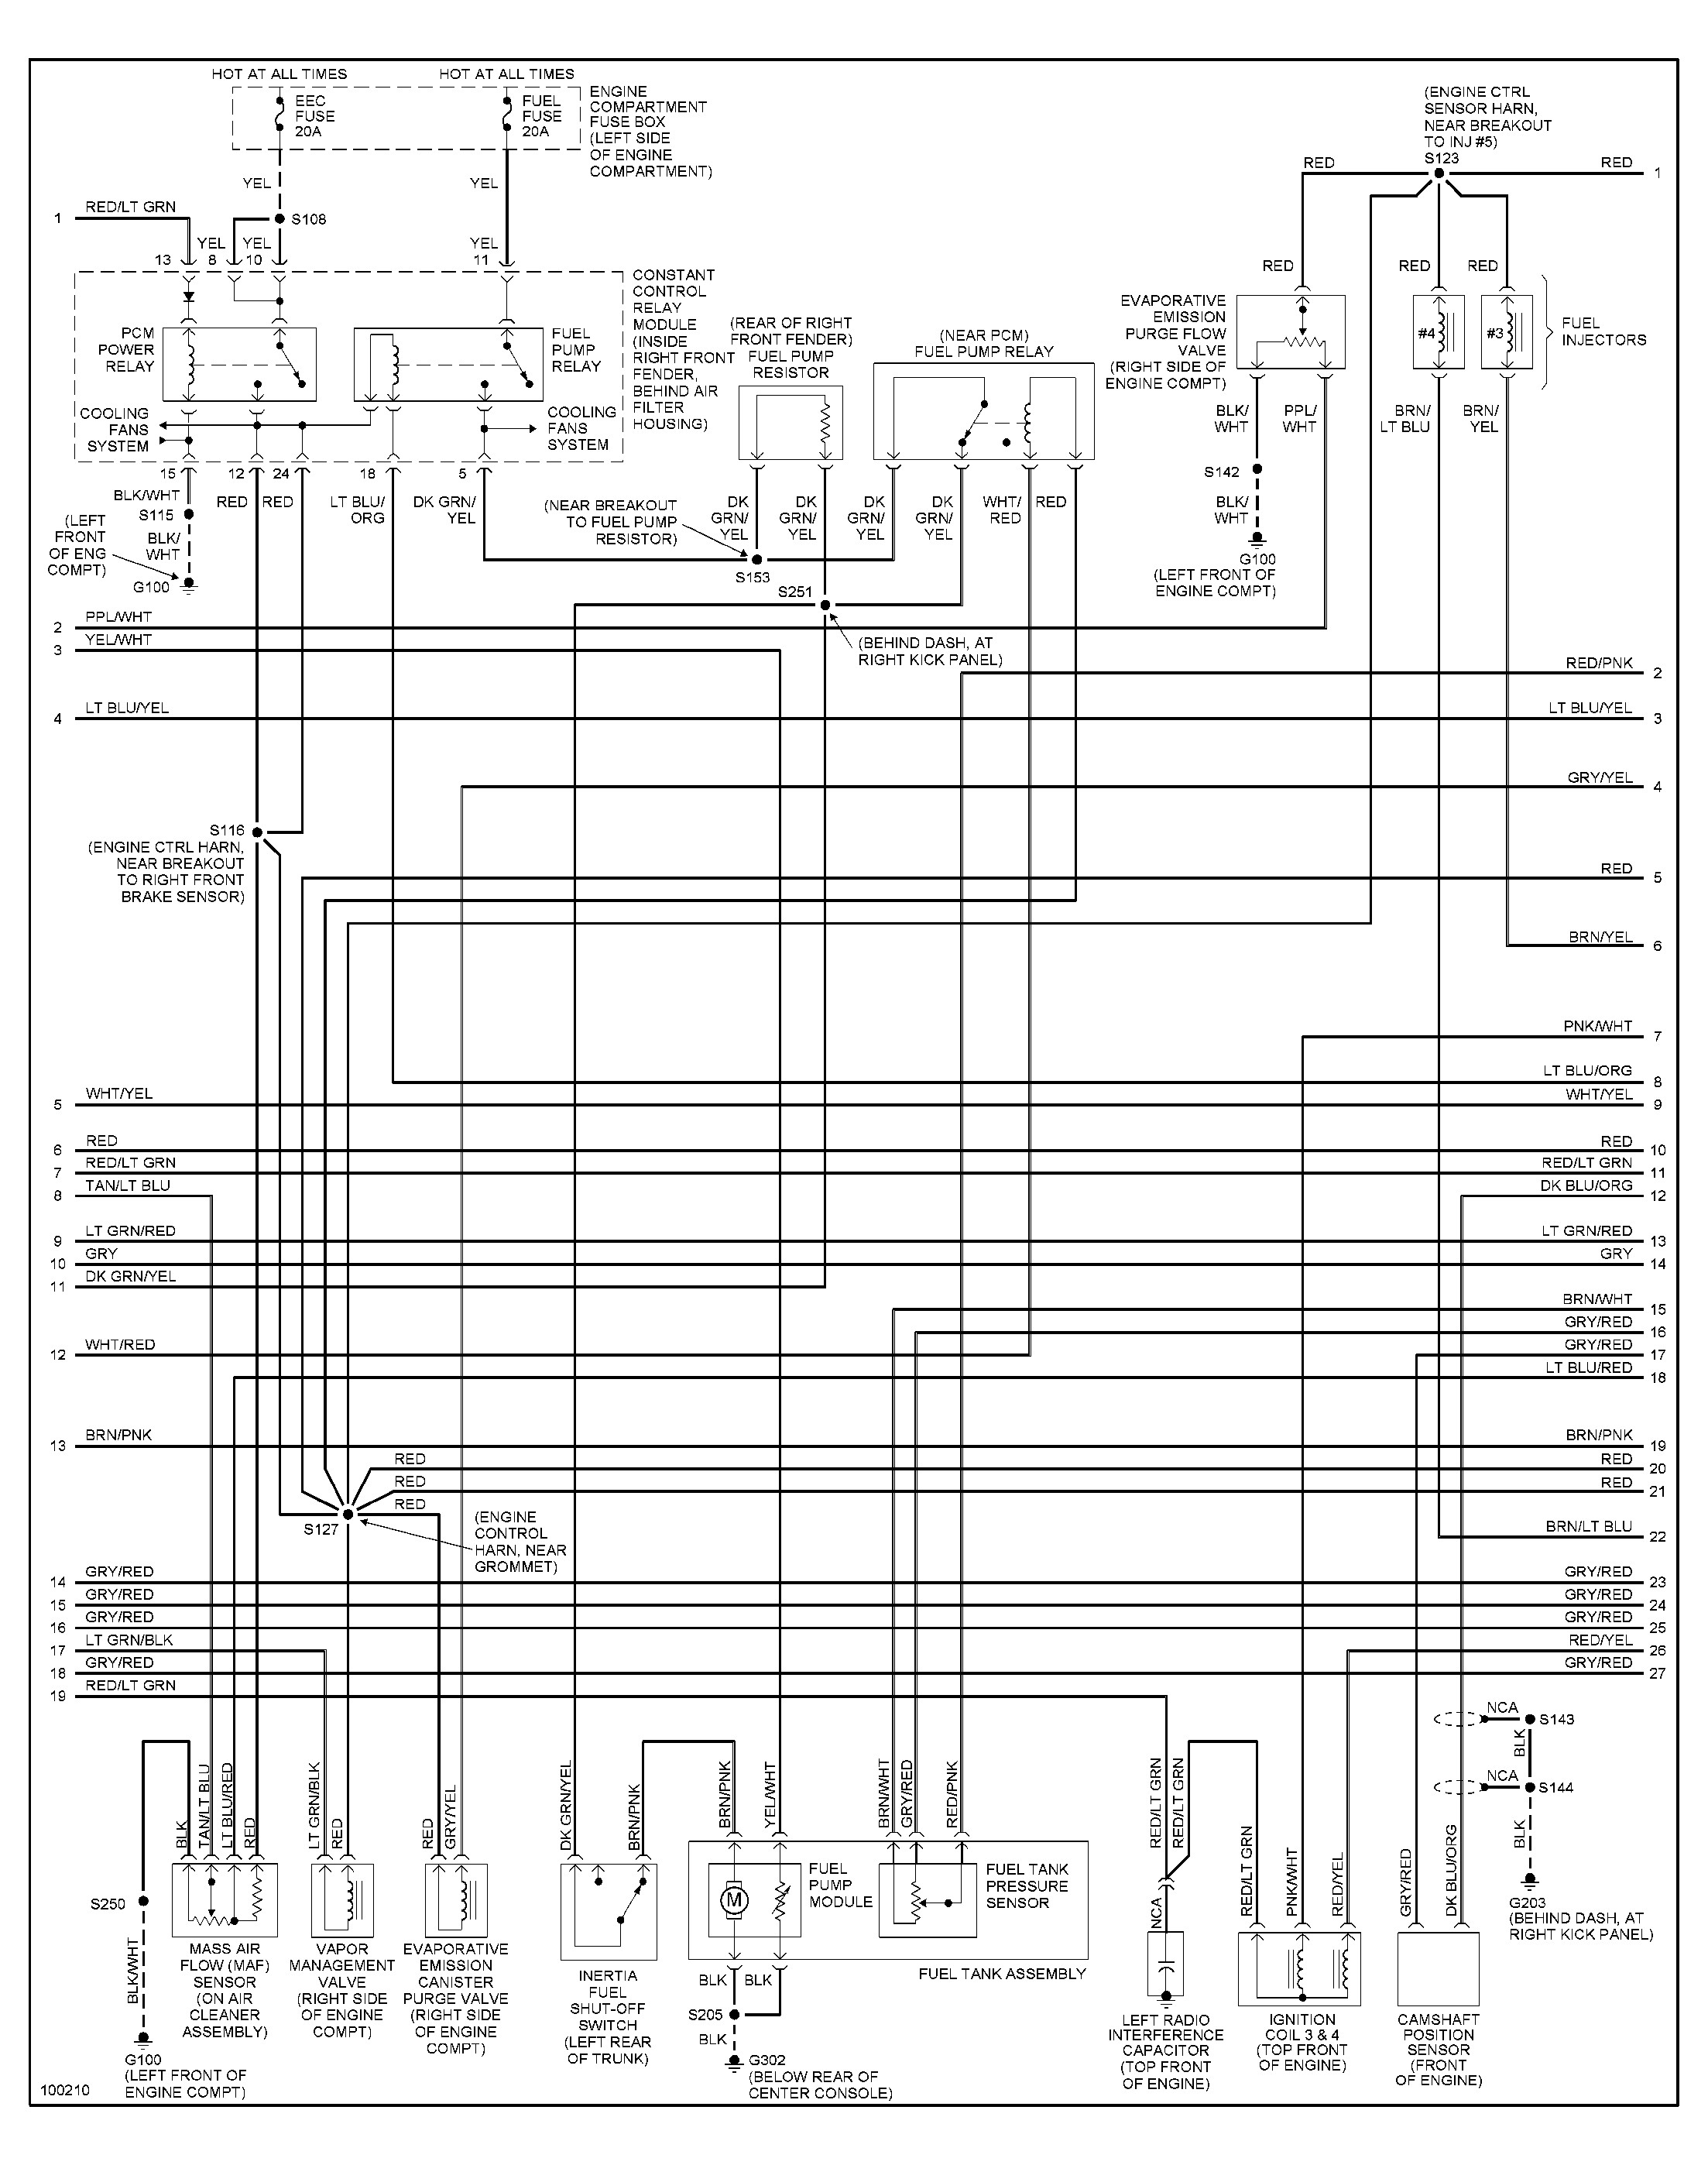 2007 ford Mustang Wiring Diagram ford Mustang Gt 98 Fuel Pump Not Working Tried Checking at 1998 Of 2007 ford Mustang Wiring Diagram